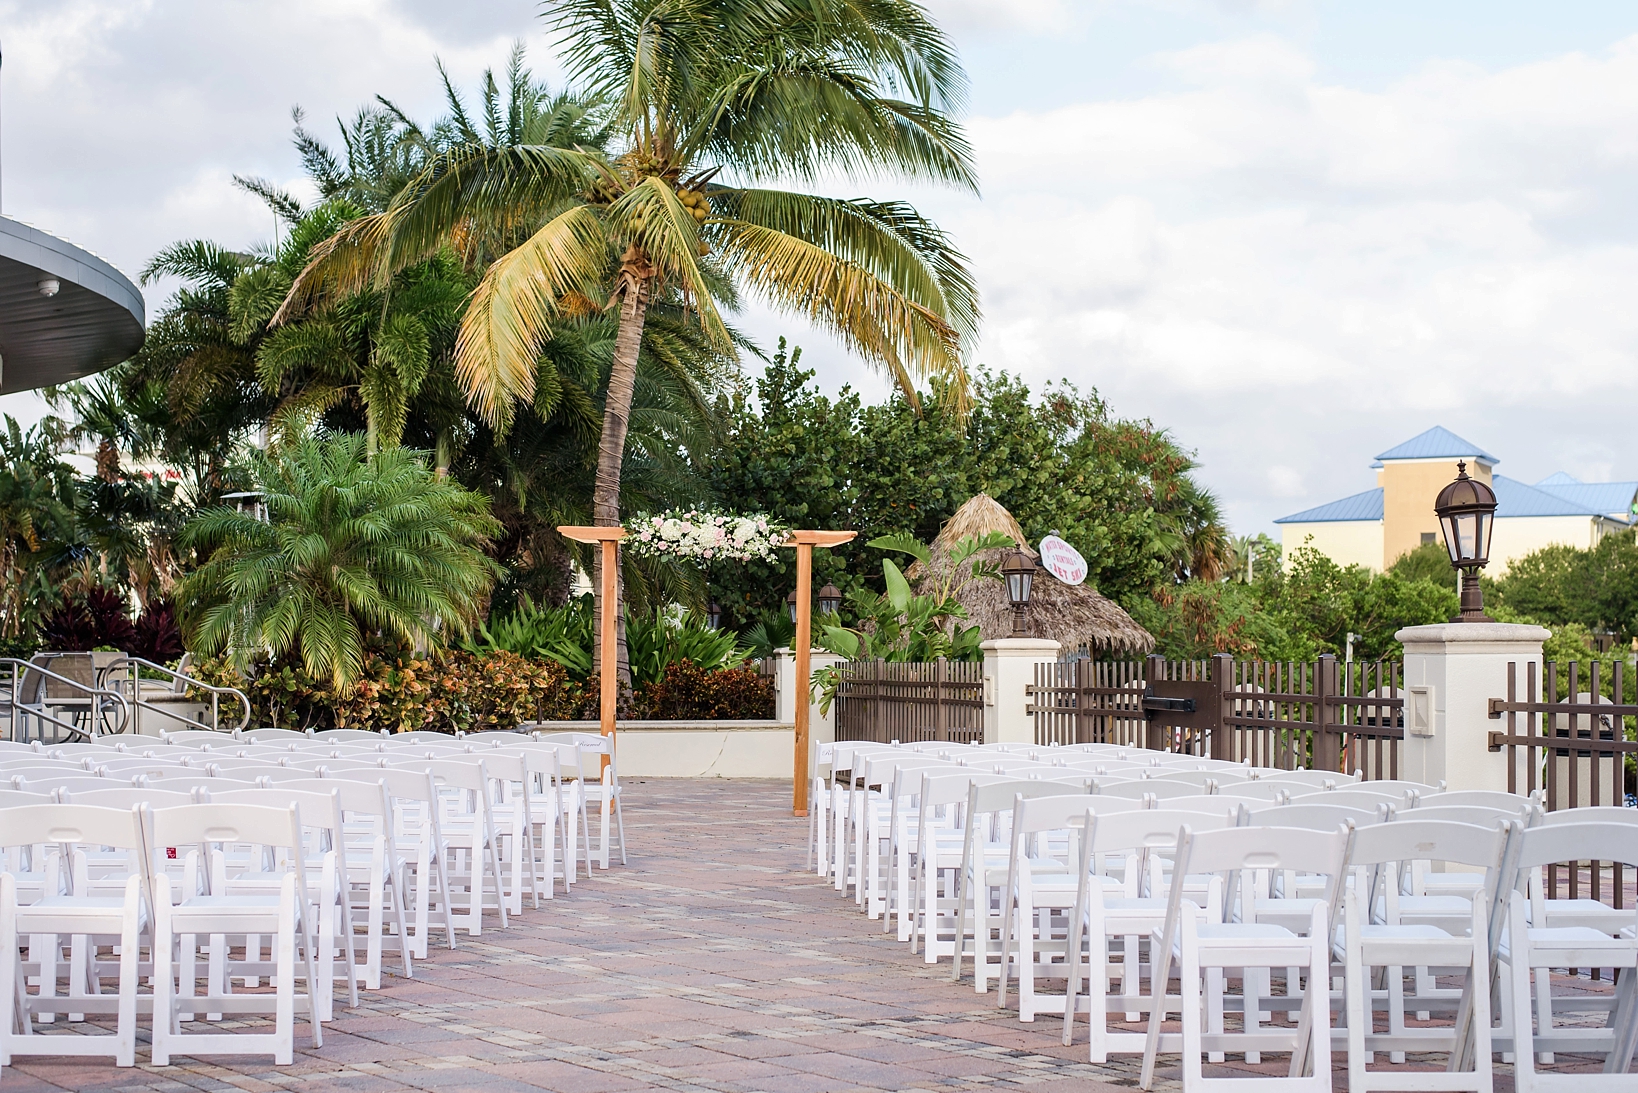 The ceremony space with hand made wooden altar and floral decor